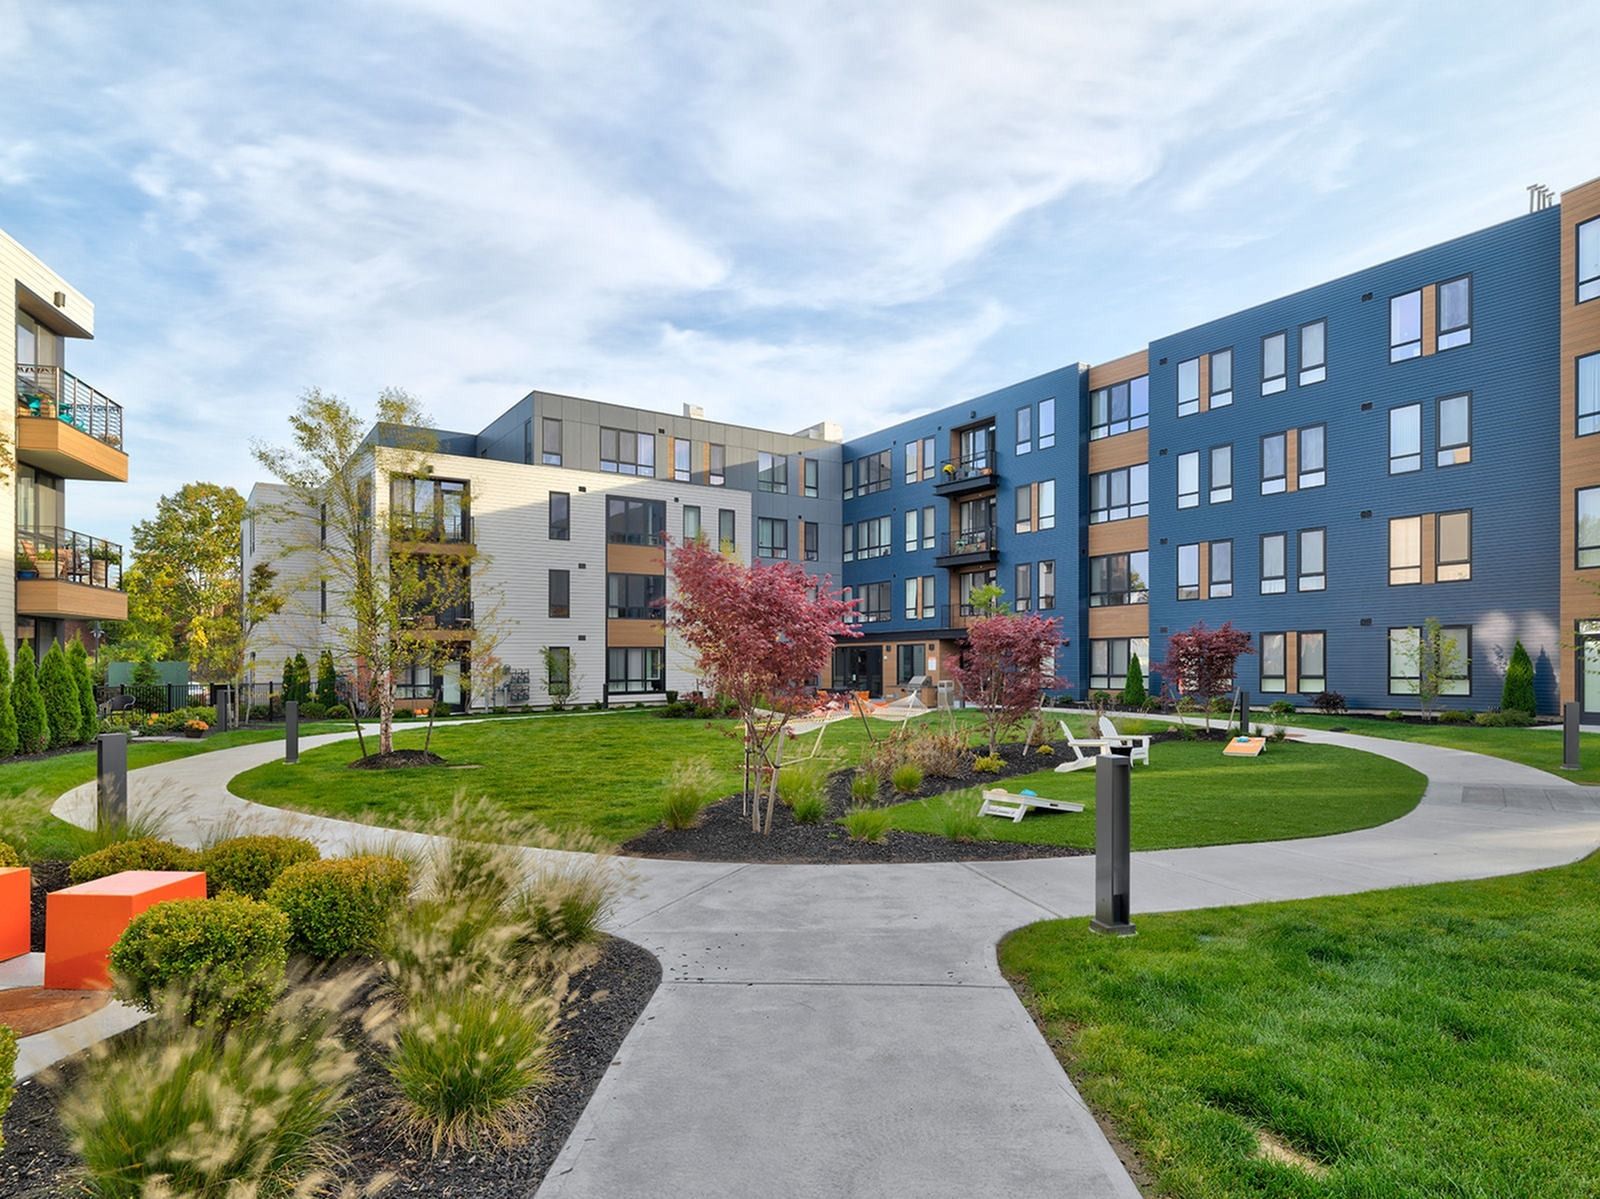 Exterior view of West End Yards' apartment community with green lawn and apartment building.